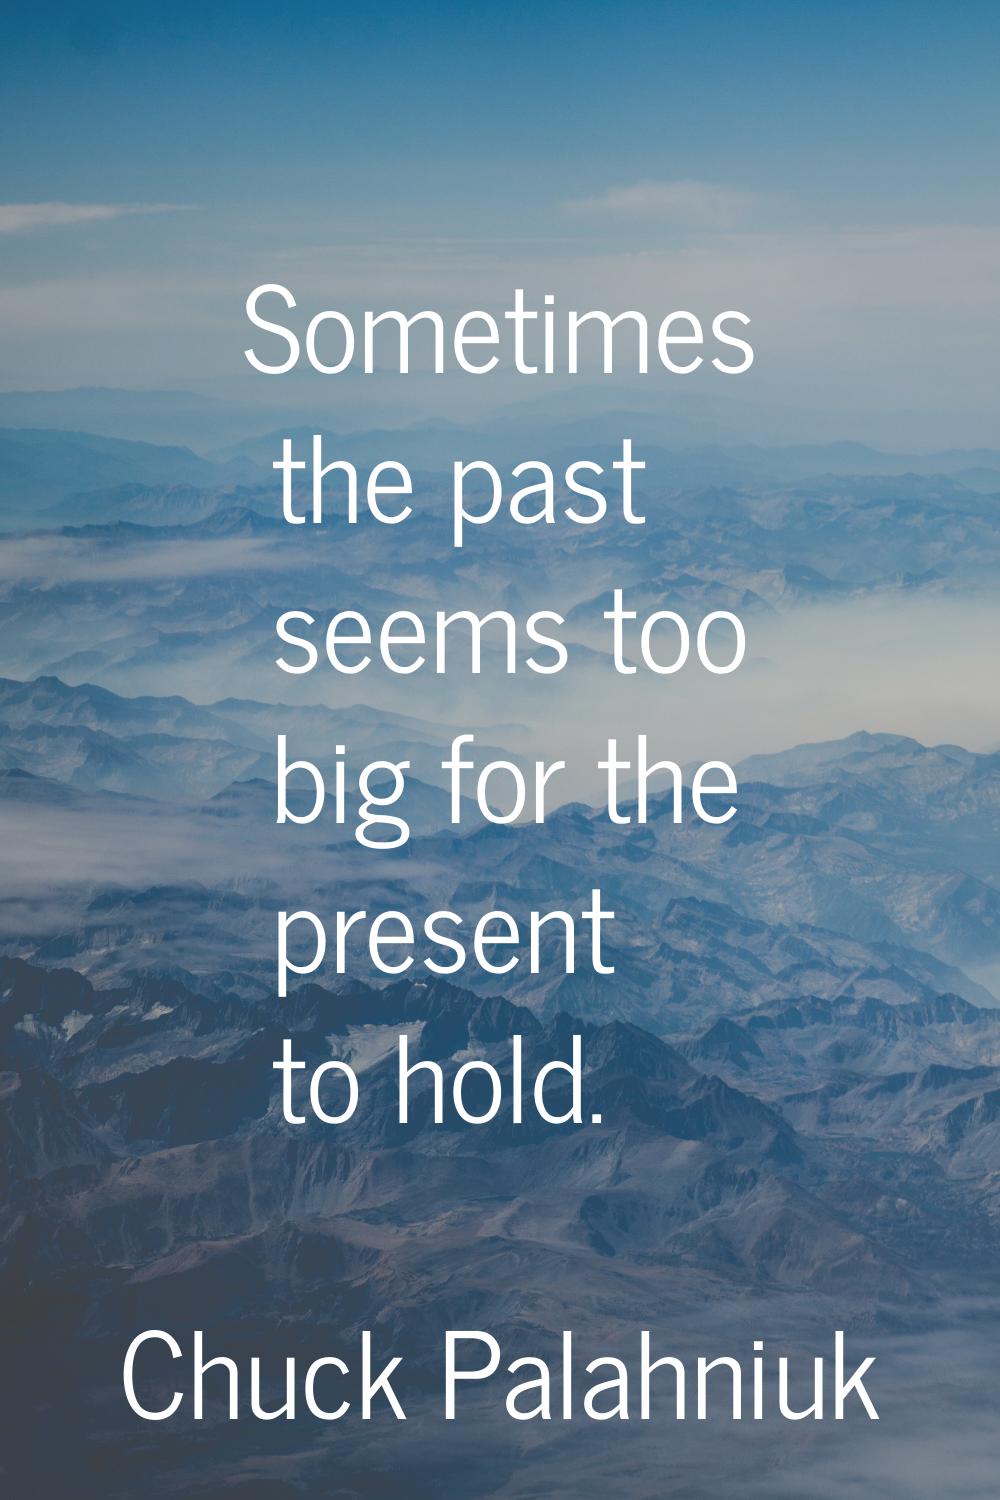 Sometimes the past seems too big for the present to hold.